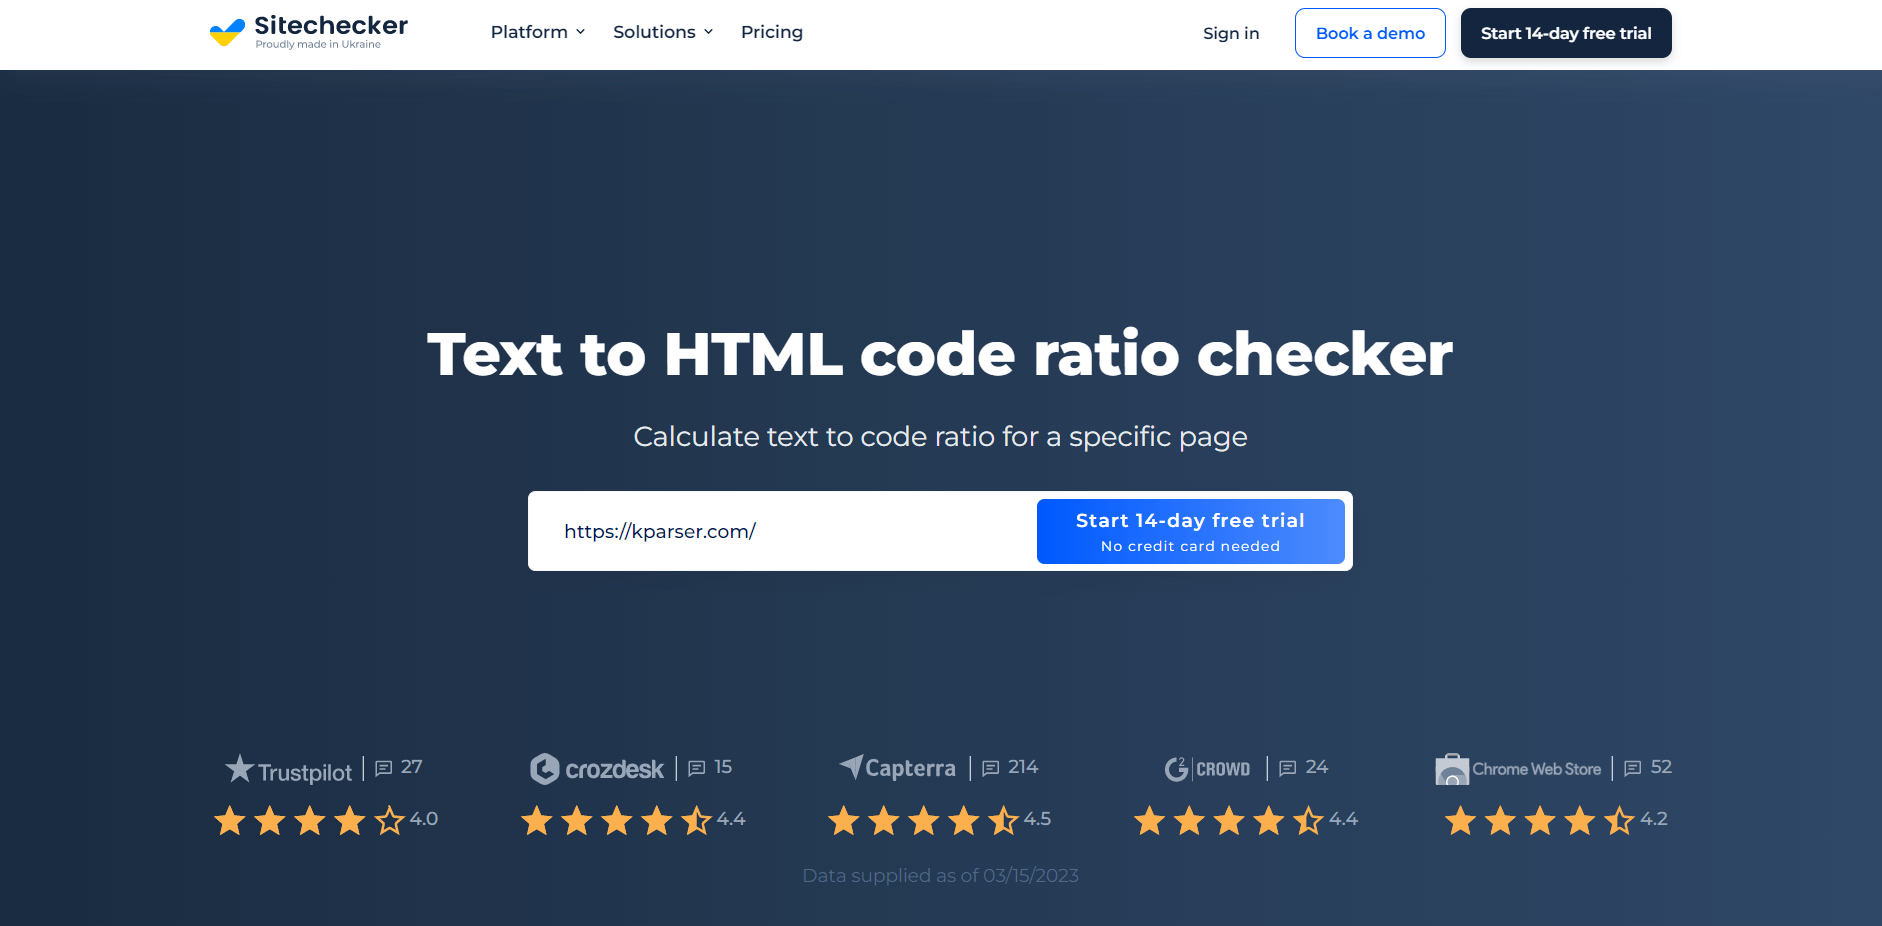 text to html code ratio checker free trial start